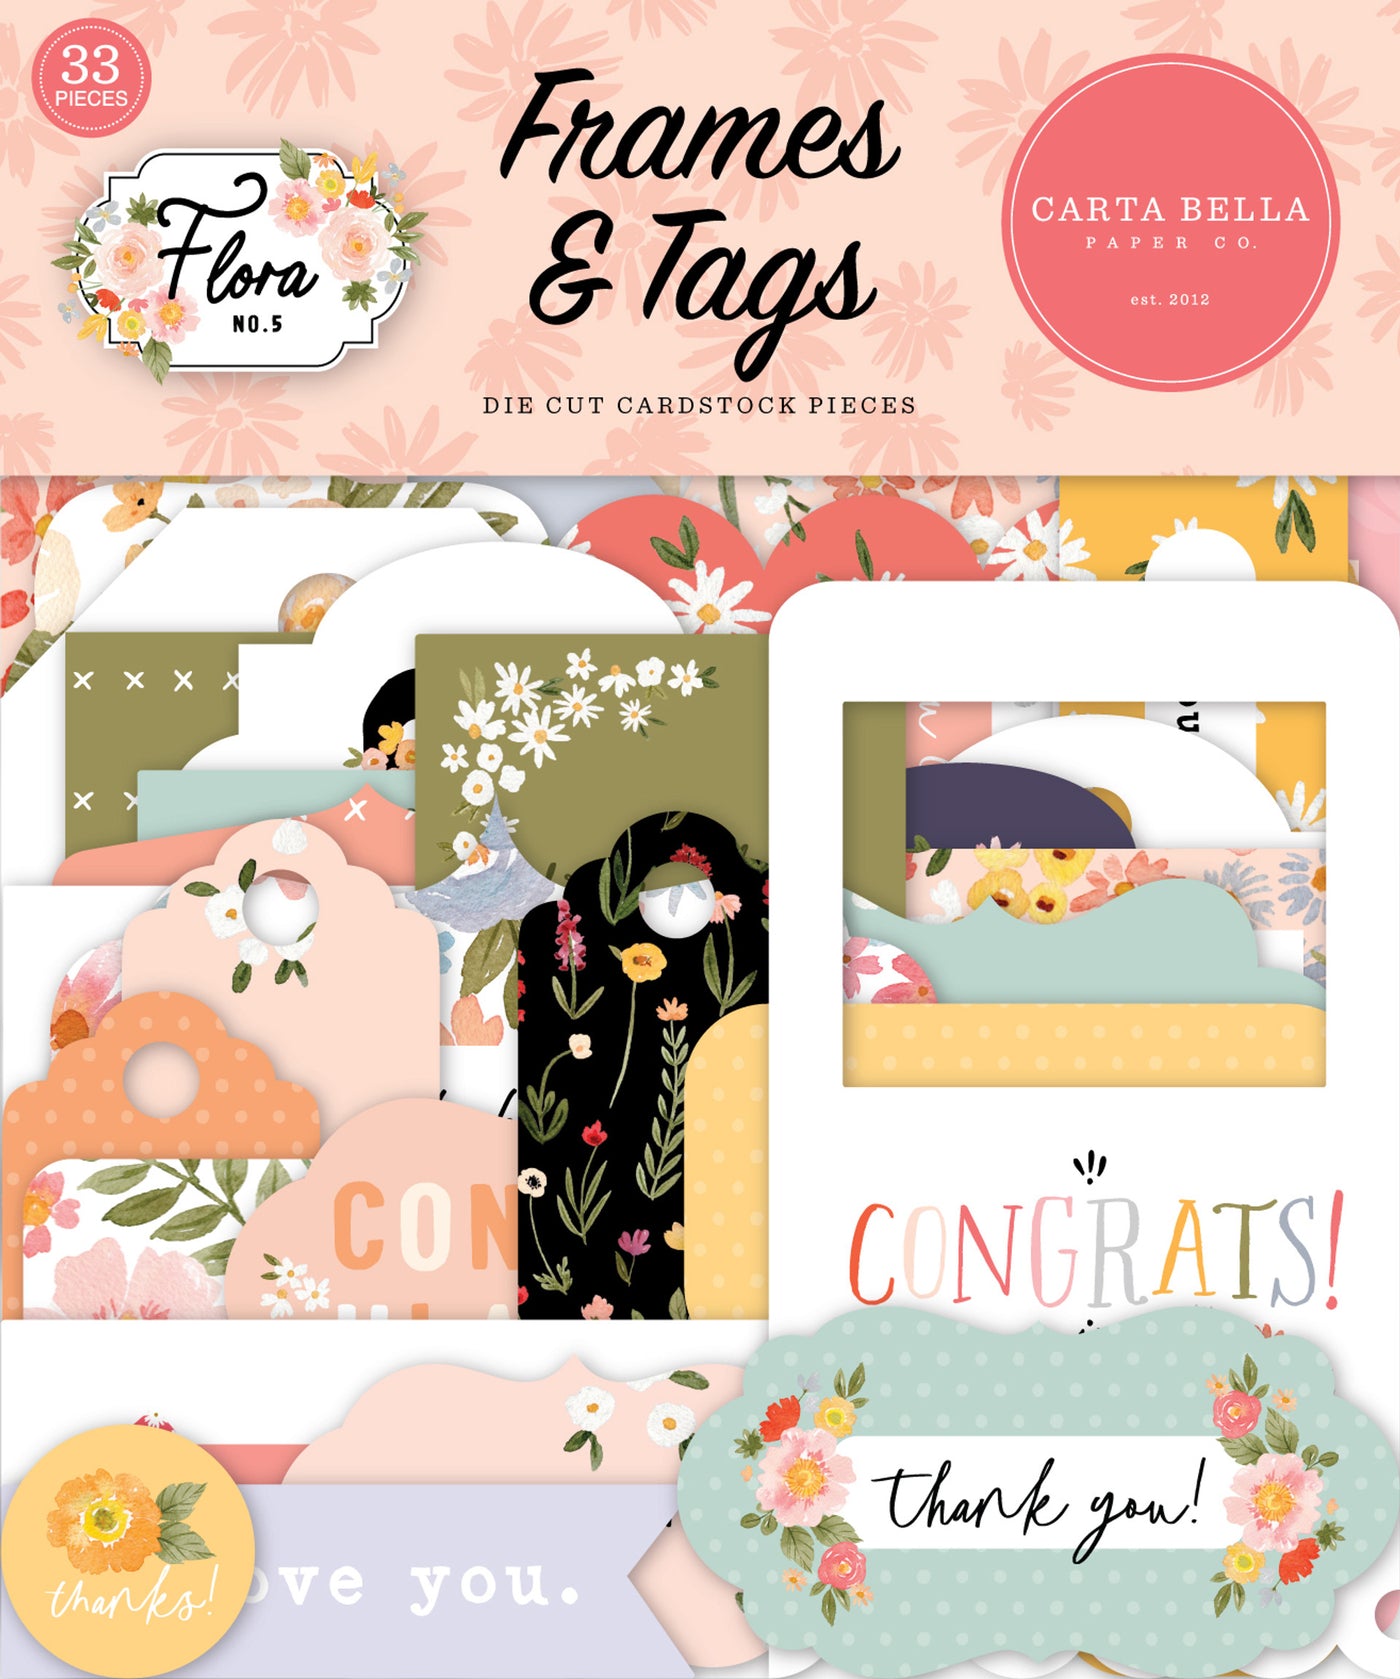 Flora No. 5 Frames & Tags Die Cut Cardstock Pack. Pack includes 33 different die-cut shapes ready to embellish any project. Package size is 4.5" x 5.25"